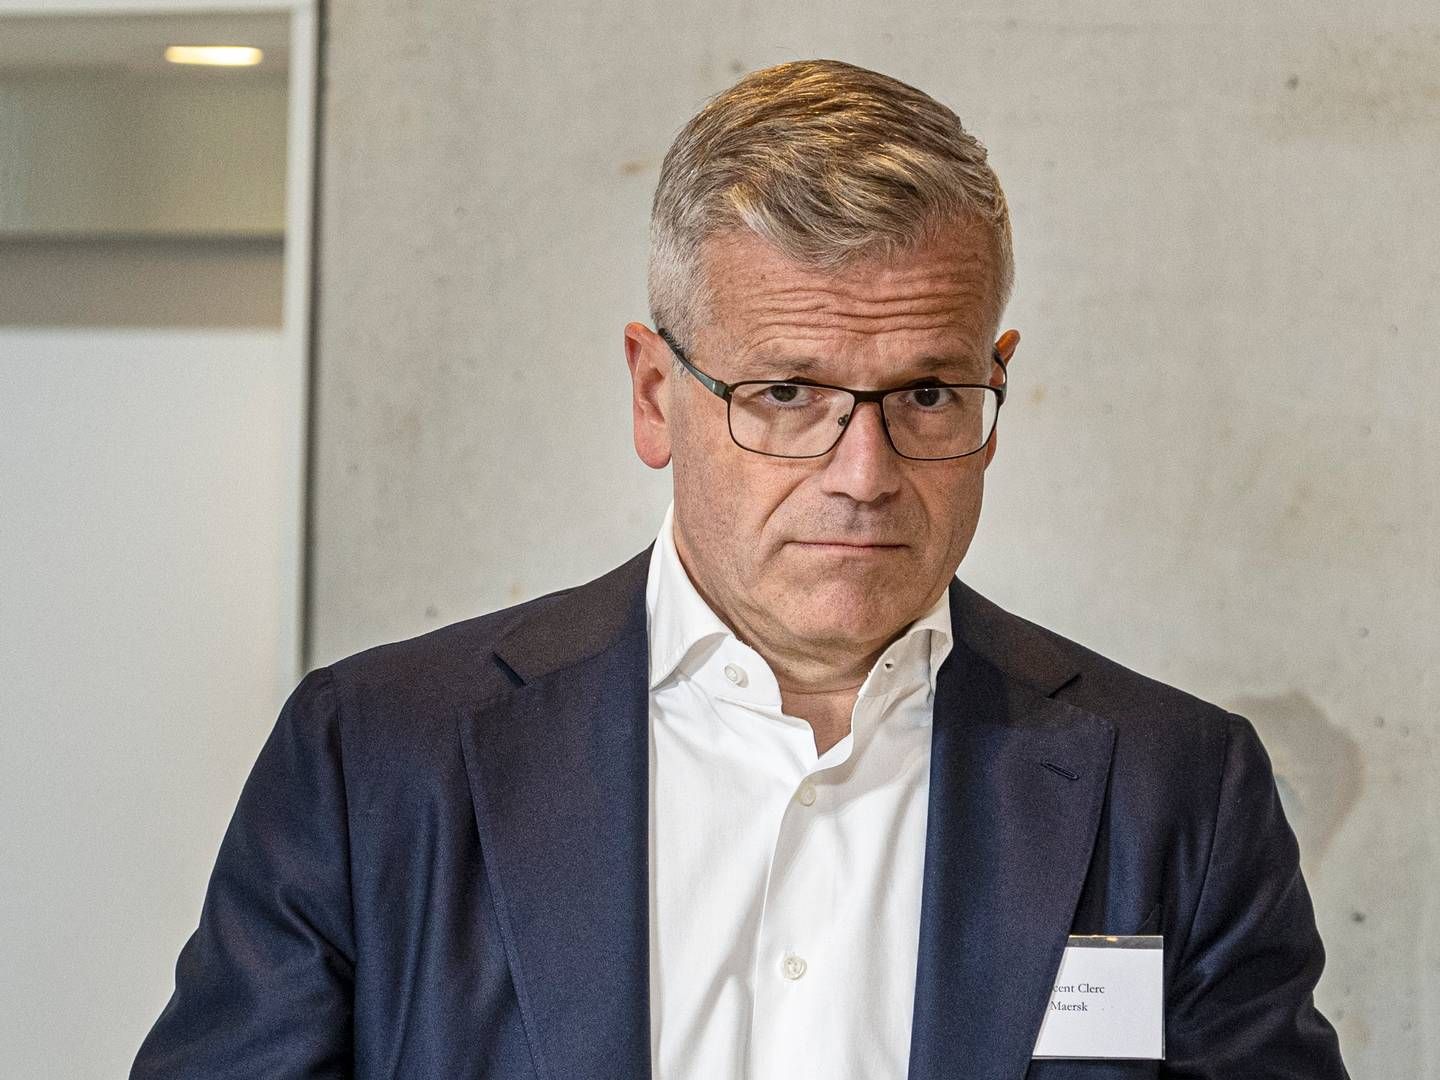 Yesterday, Maersk CEO Vincent Clerc pulled the plug on his ambitions to buy German freight forwarding giant DB Schenker. | Photo: Kenneth Meyer